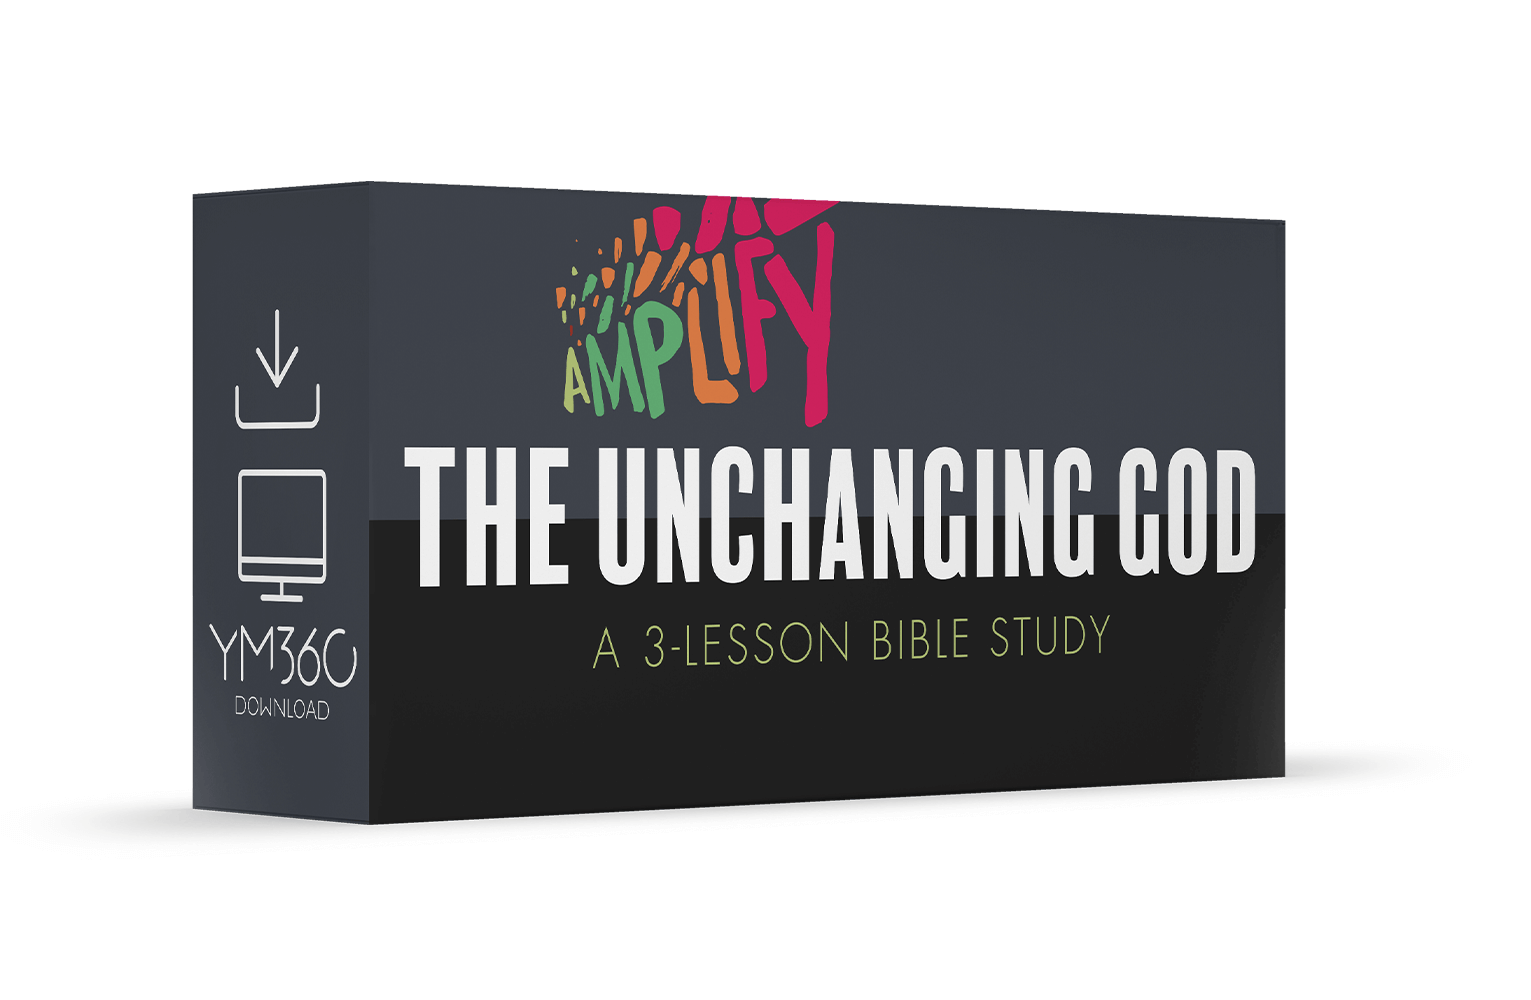 The Unchanging God: A 3-Lesson Bible Study